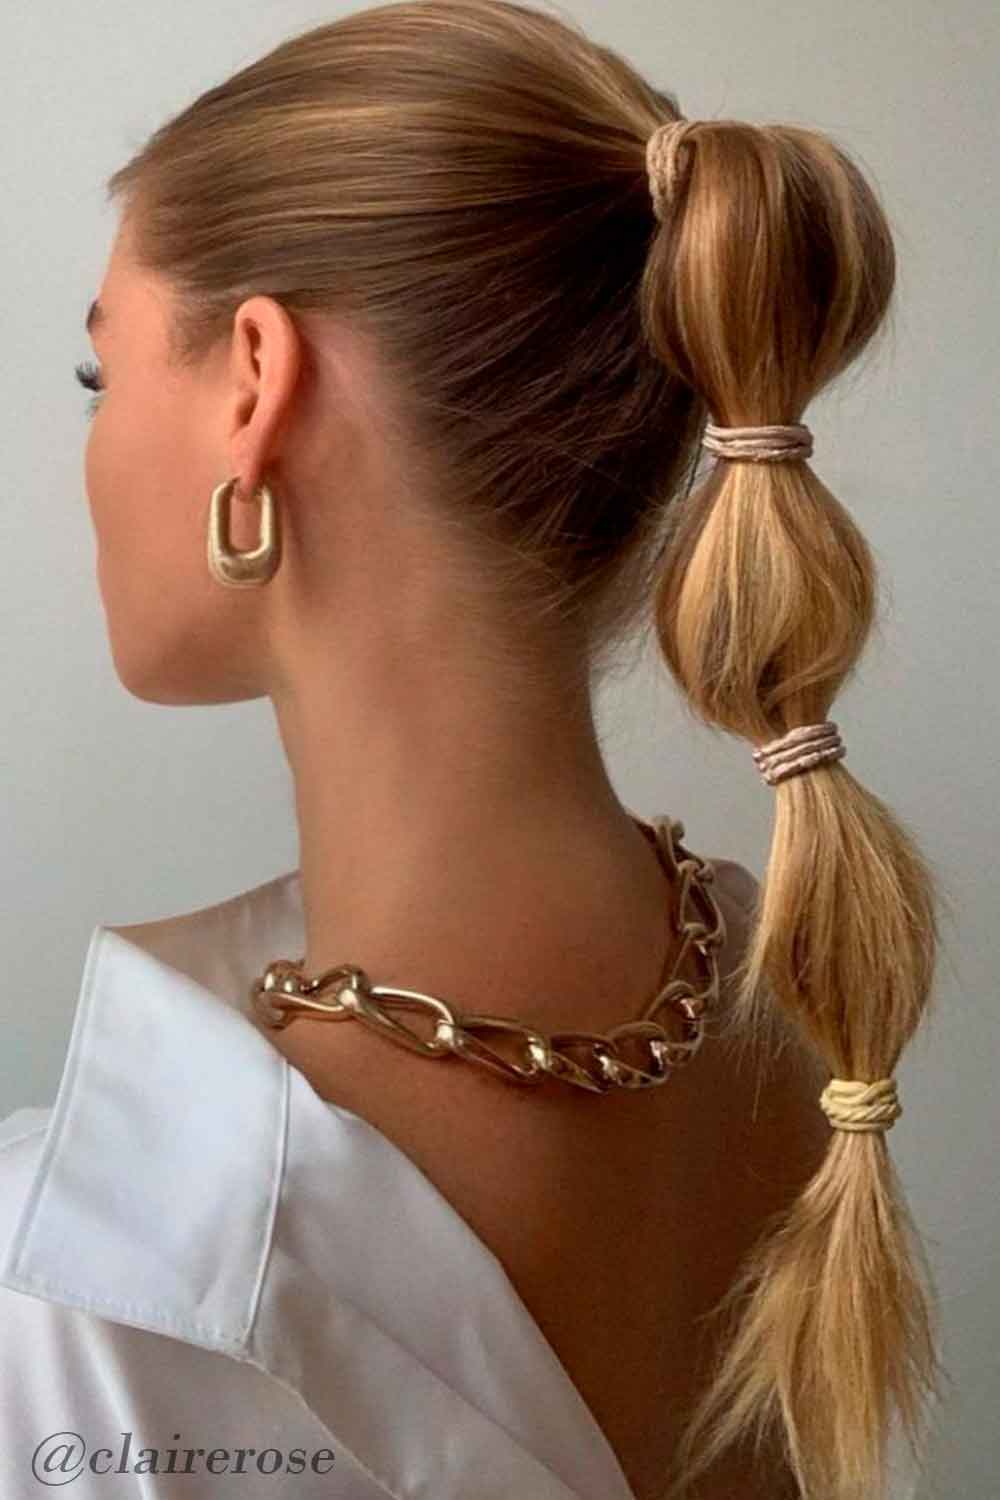 Amazing bubble ponytails will be one of the best hair trends